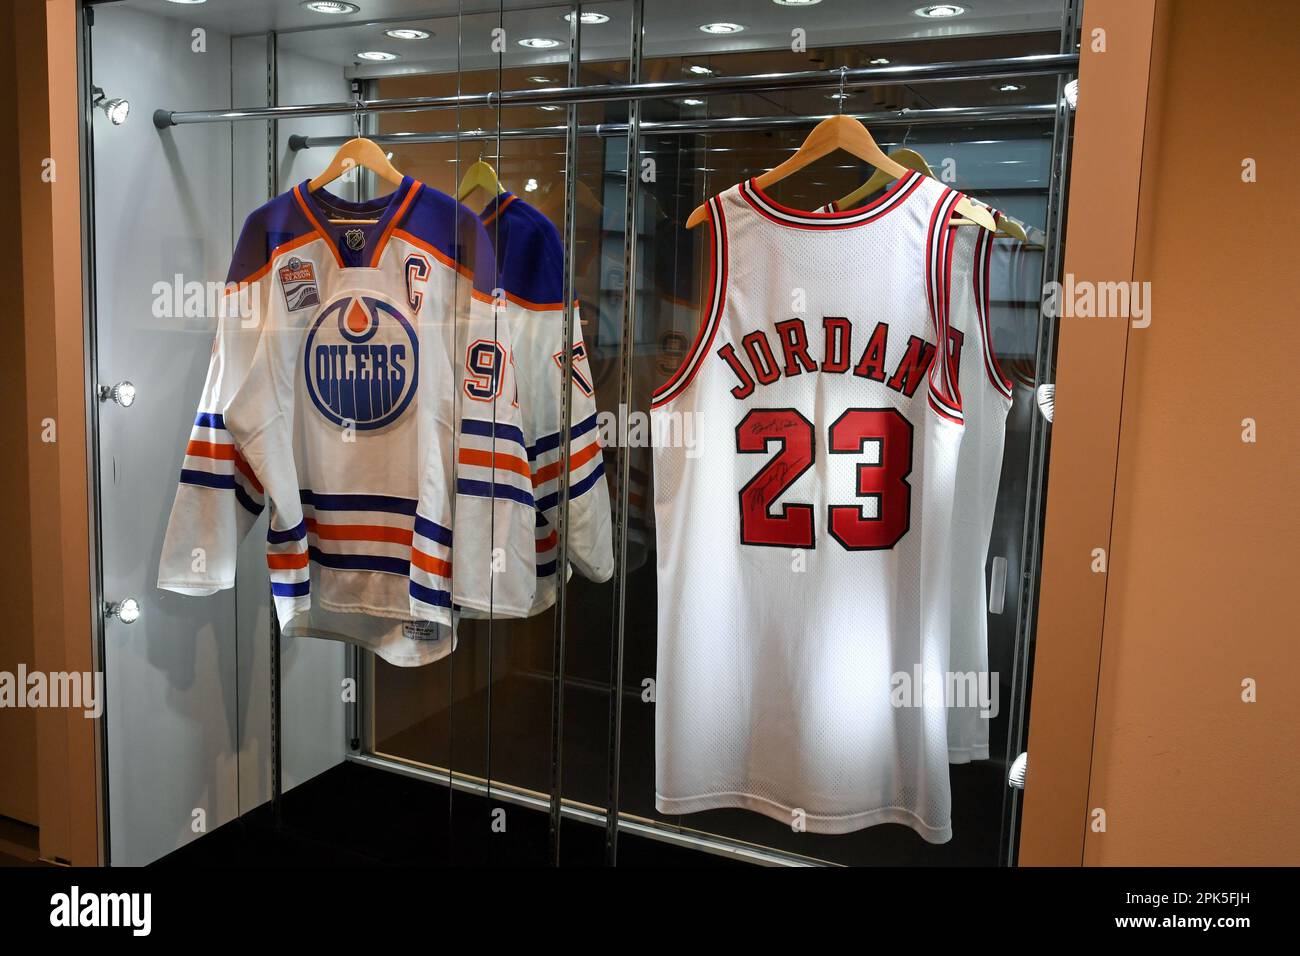 New York, USA. 05th Apr, 2023. (L-R) Connor McDavid 2016 Edmonton Oilers '1st Career Hat Trick' Game Worn Jersey (matched to 5 games), est. $60,000-80,000, and Michael Jordan 1998 'The Last Dance' Chicago Bulls Signed & Game Worn Jersey (Matched to 2 Games), est. $500,000-700,000, are shown at Sotheby's in New York, NY on April 5, 2023. 'Victoriam | Parts I & II' memorabilia will be open for bidding from 3-11 April, alongisde a public exhibition at Sotheby's New York. (Photo by Efren Landaos/Sipa USA) Credit: Sipa USA/Alamy Live News Stock Photo